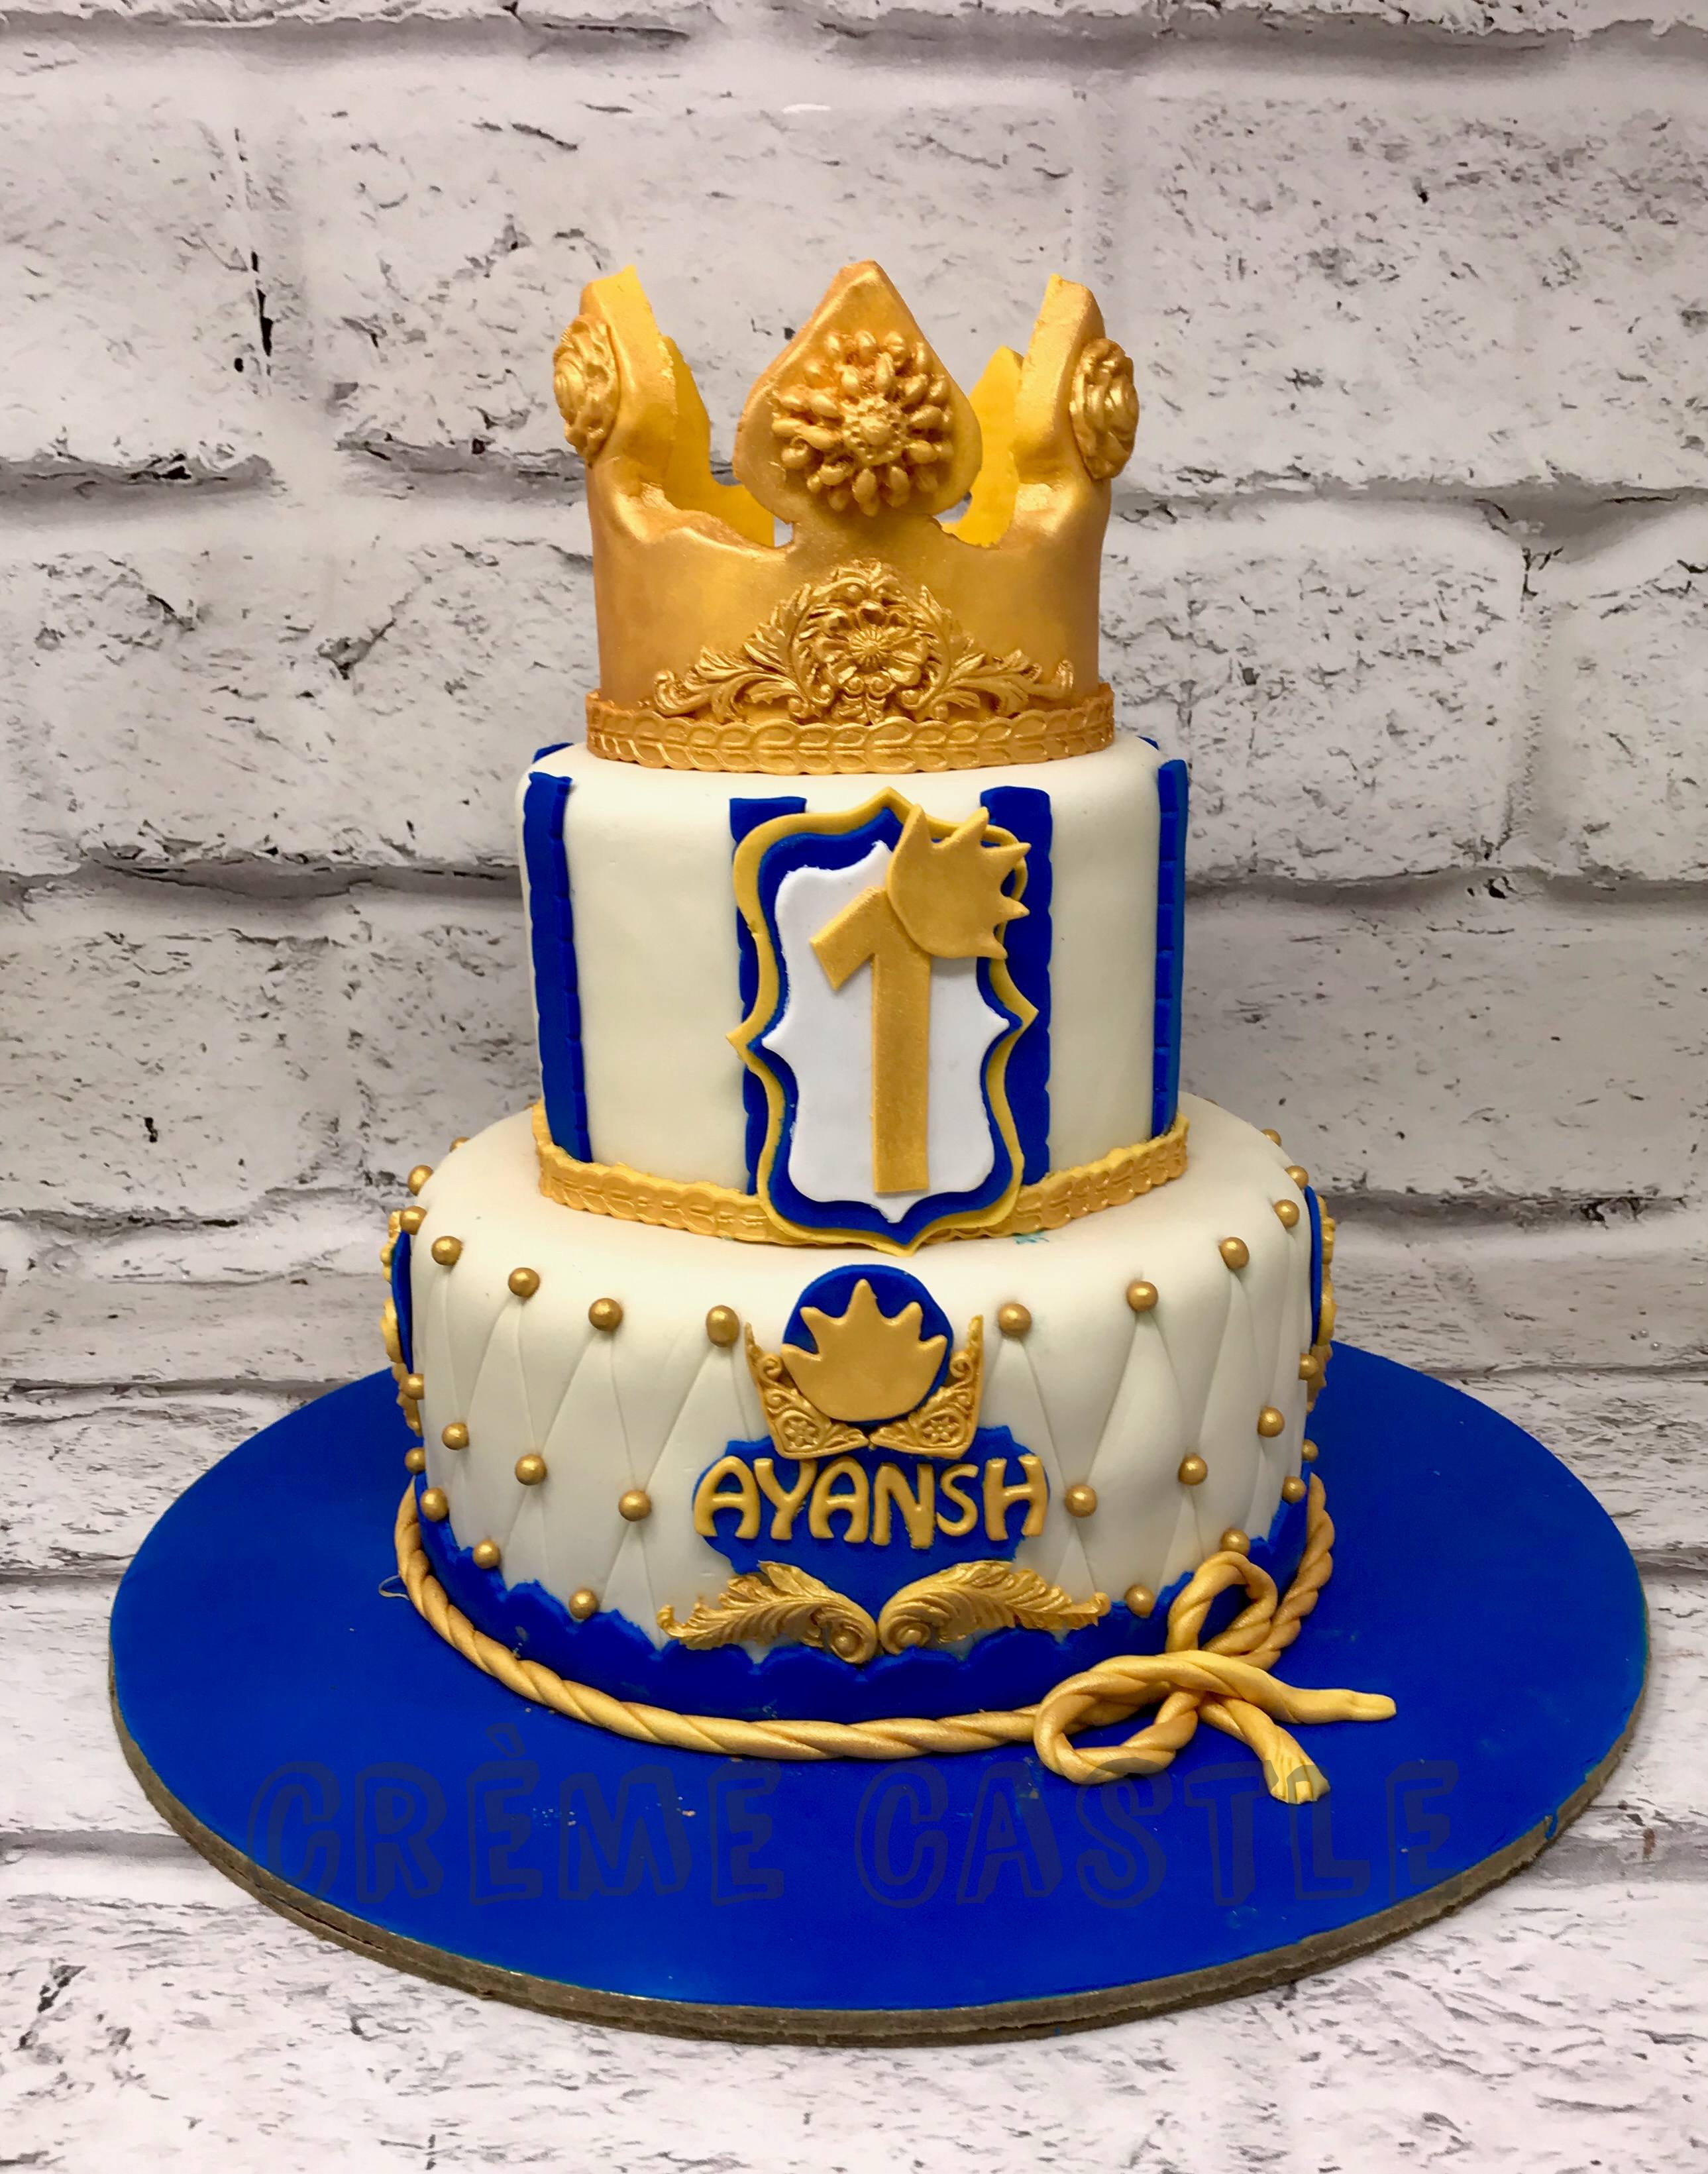 Birthday Fit For A King - CakeCentral.com